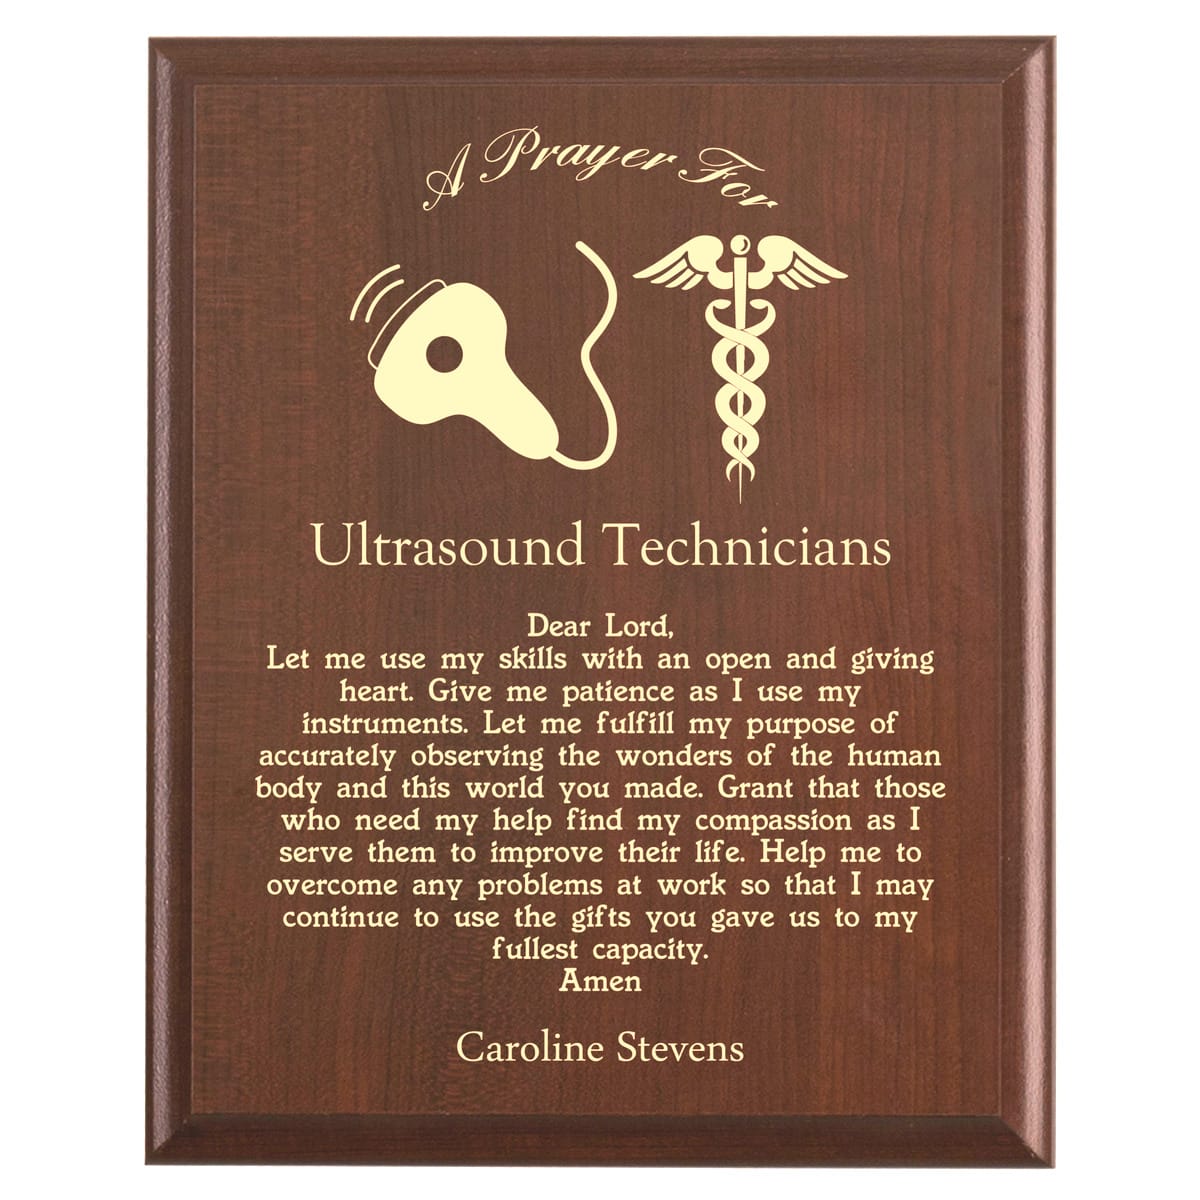 Plaque photo: Ultrasound Tech Prayer Plaque design with free personalization. Wood style finish with customized text.